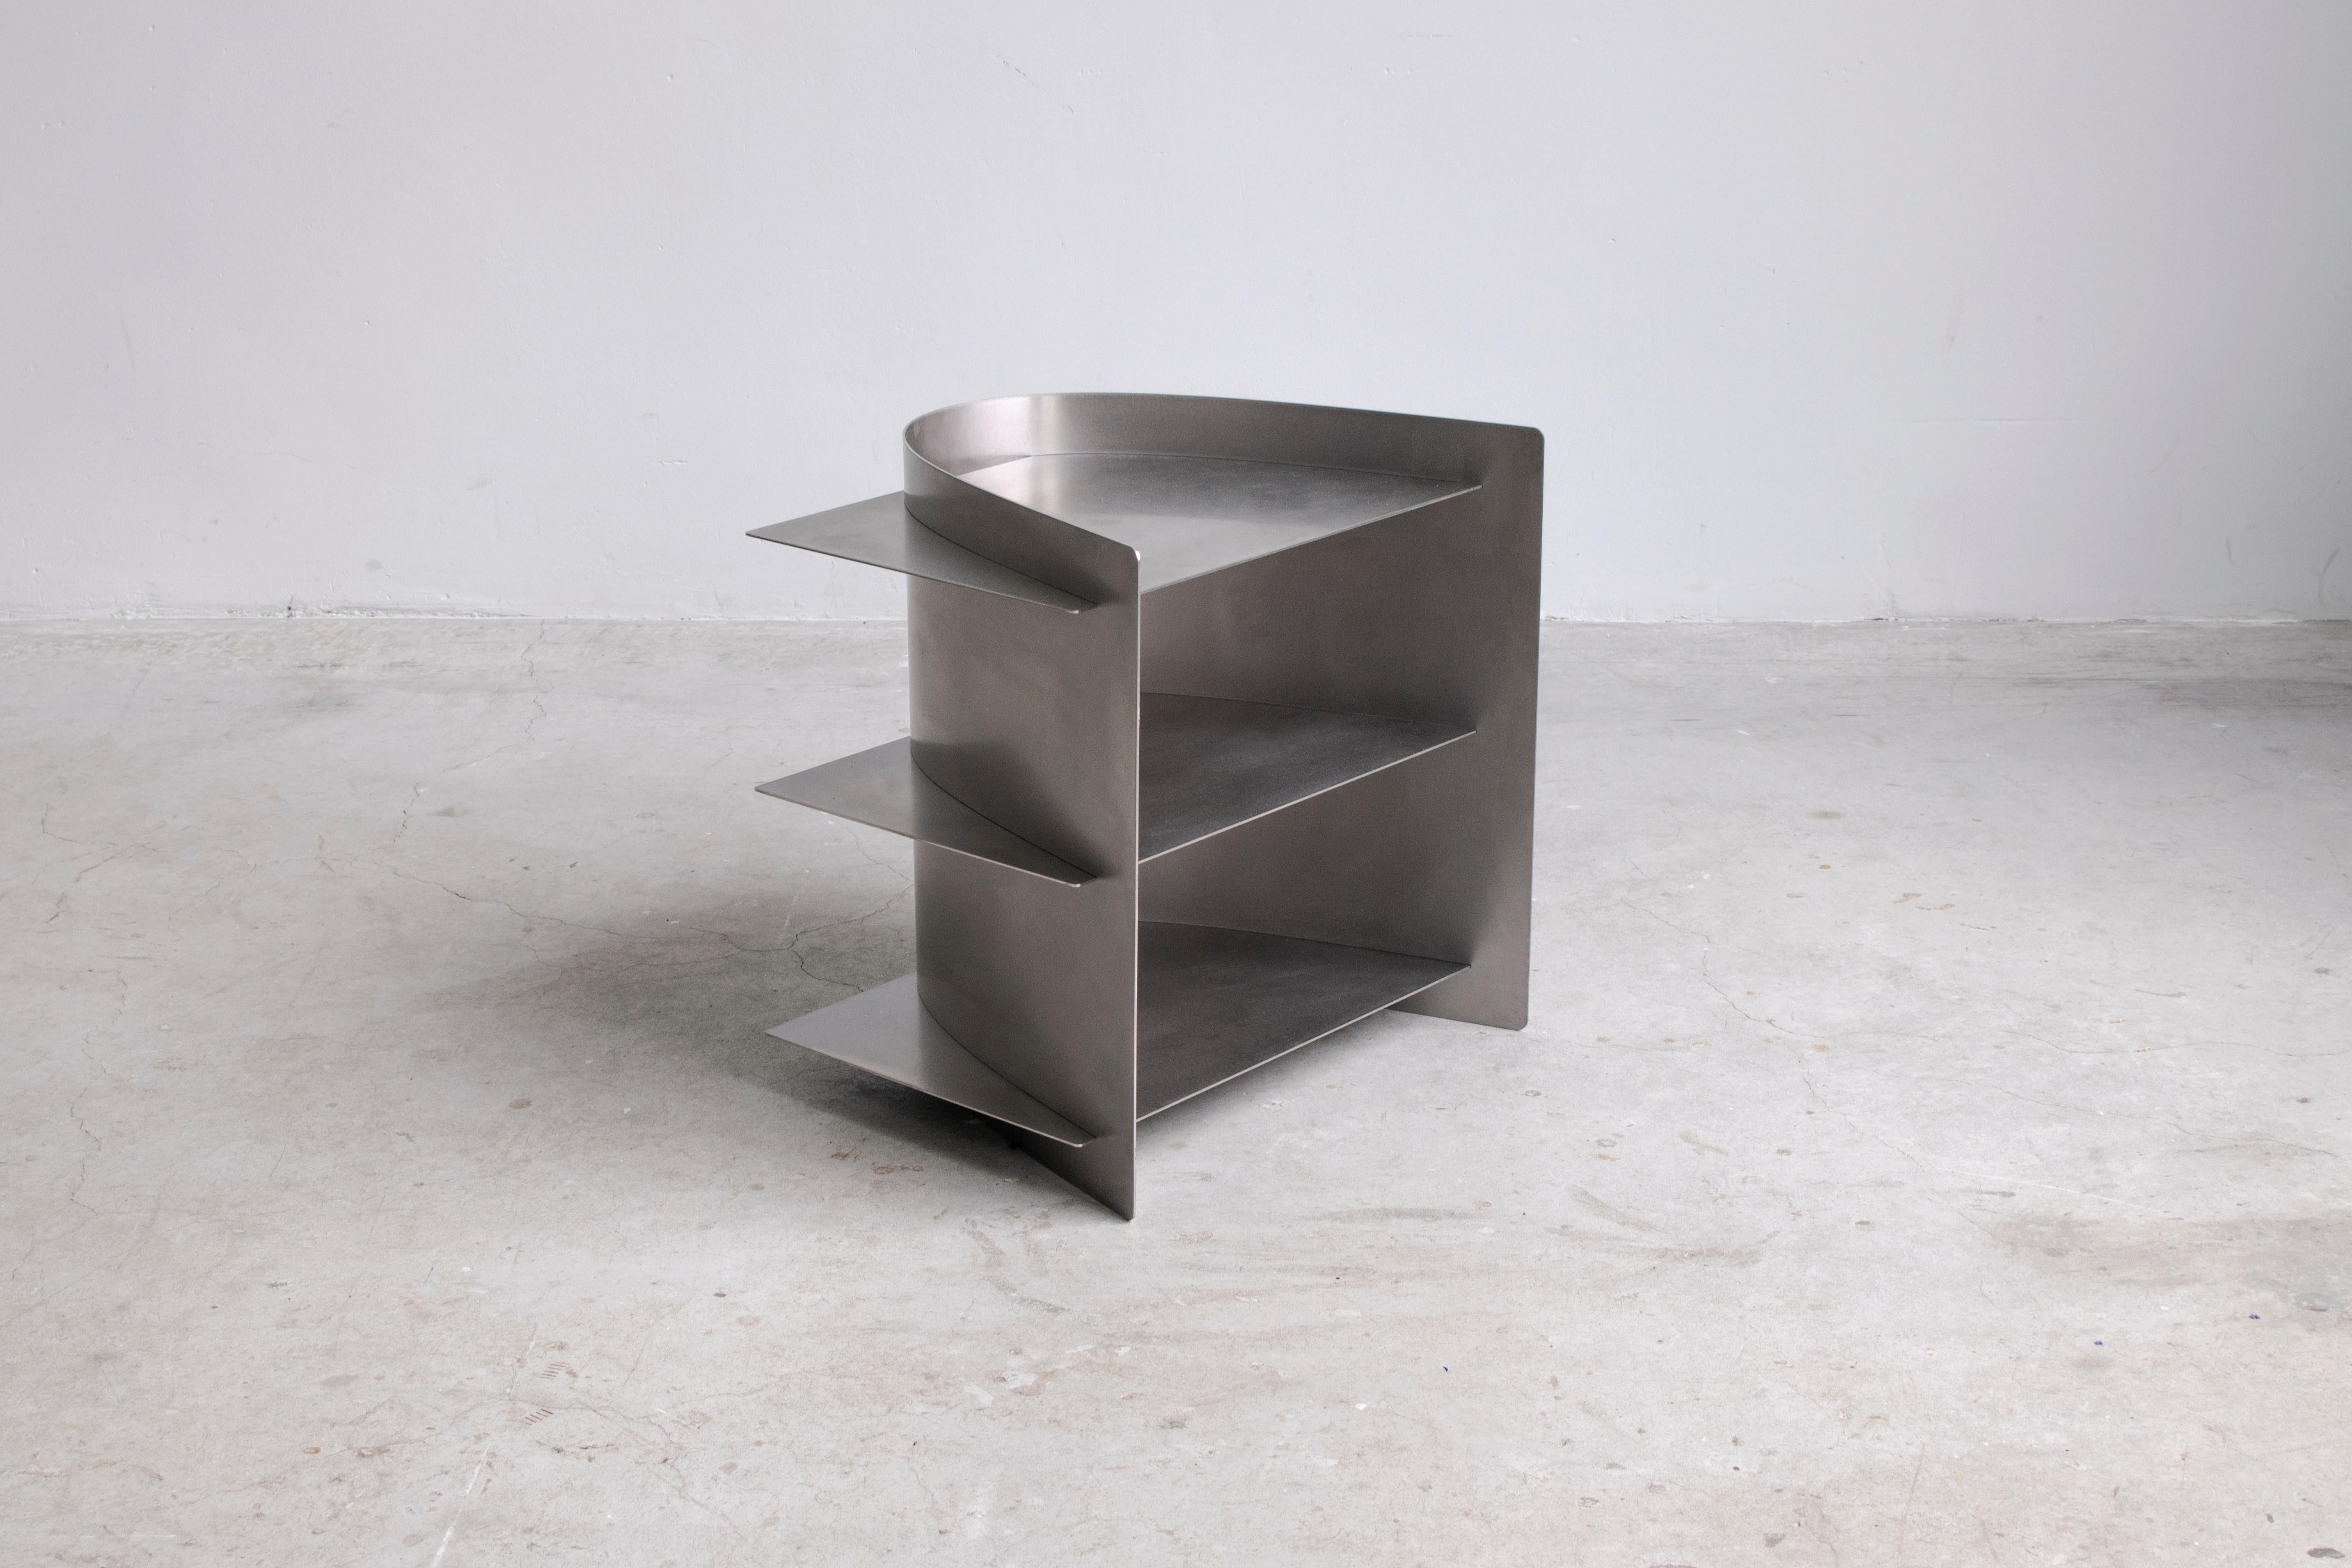 Tension side table, Paul Coenen
Dimensions: 50 x 45 x 50 cm
Materials: Sanded and waxed stainless steel

Custom colors and materials are possible on request.

Tension Collection The manufacturing industry is using standard sized material, and